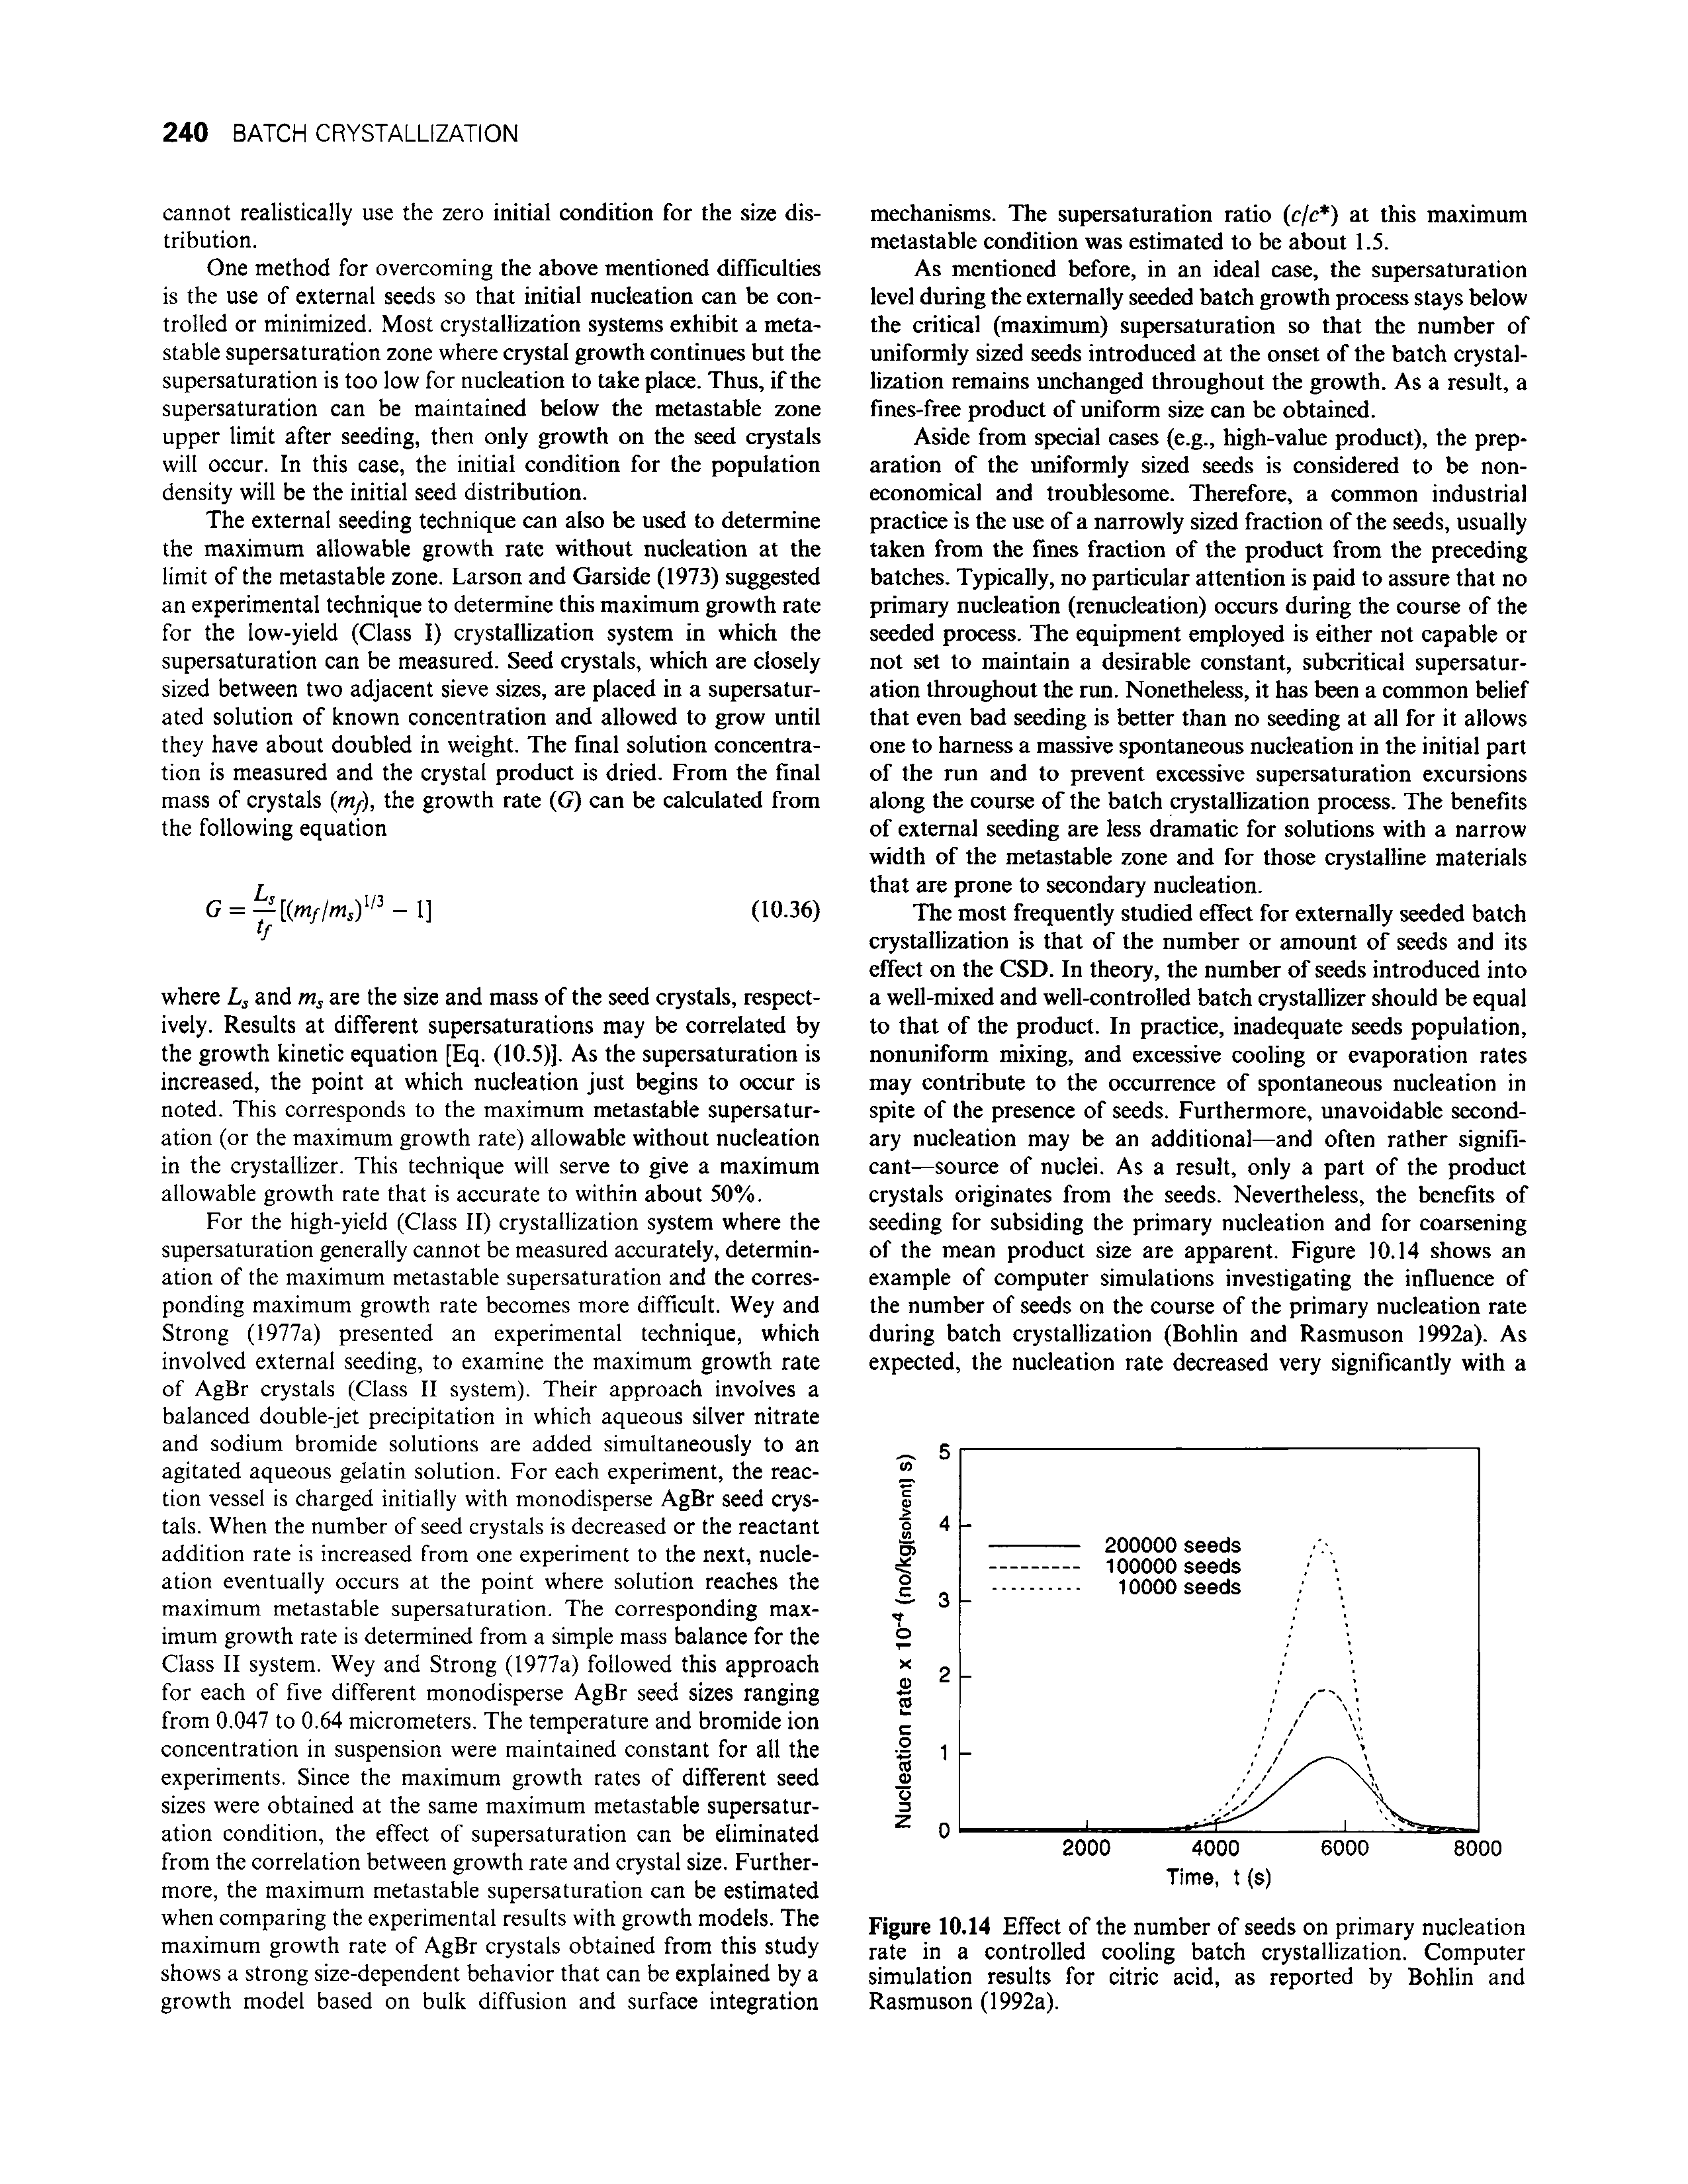 Figure 10.14 Effect of the number of seeds on primary nucleation rate in a controlled cooling batch crystallization. Computer simulation results for citric acid, as reported by Bohlin and Rasmuson (1992a).